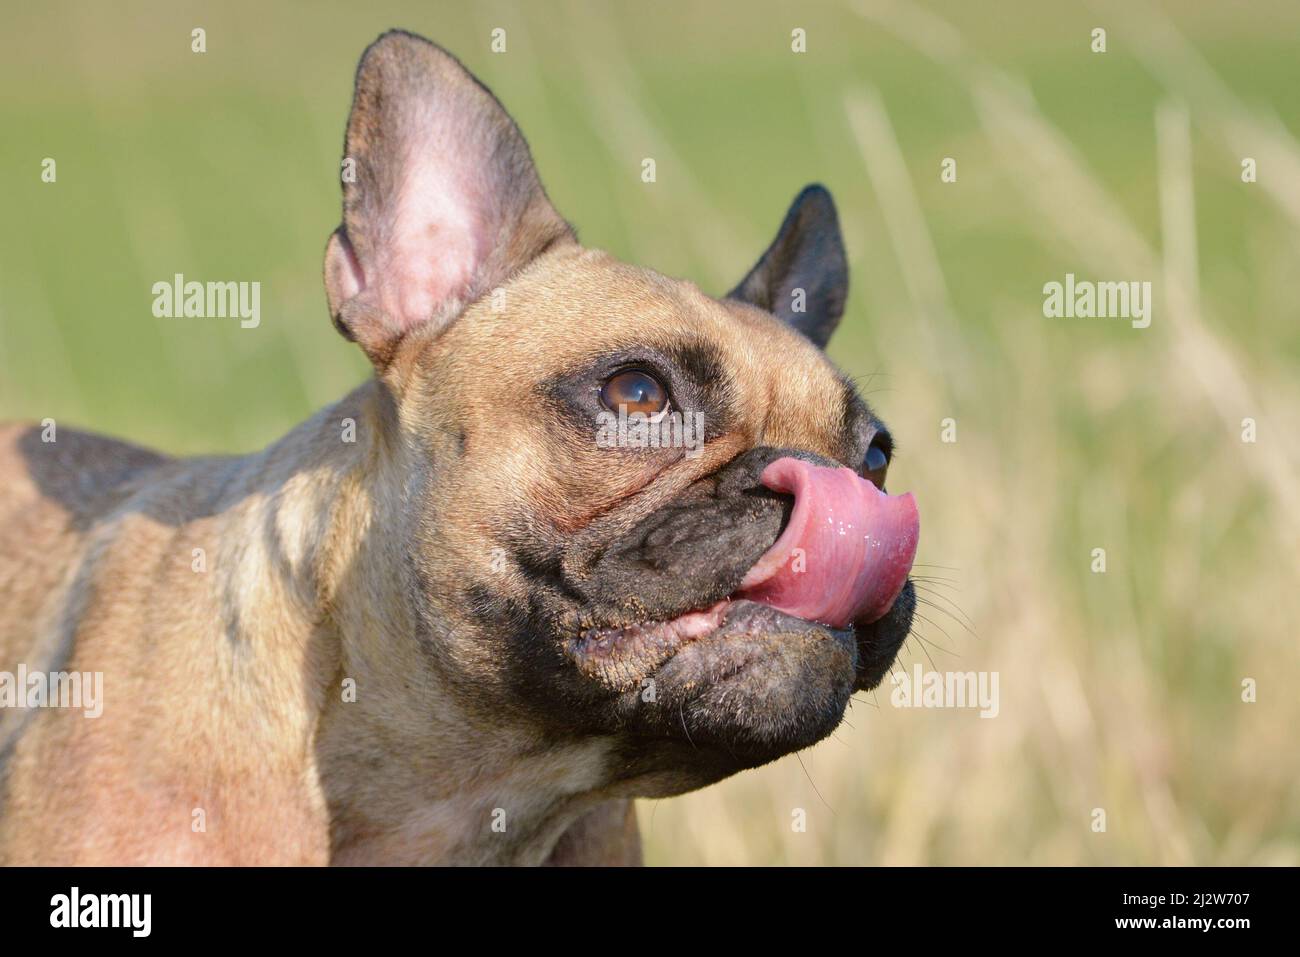 Dog licking its nose, a sign of Anxiety or nervousness Stock Photo